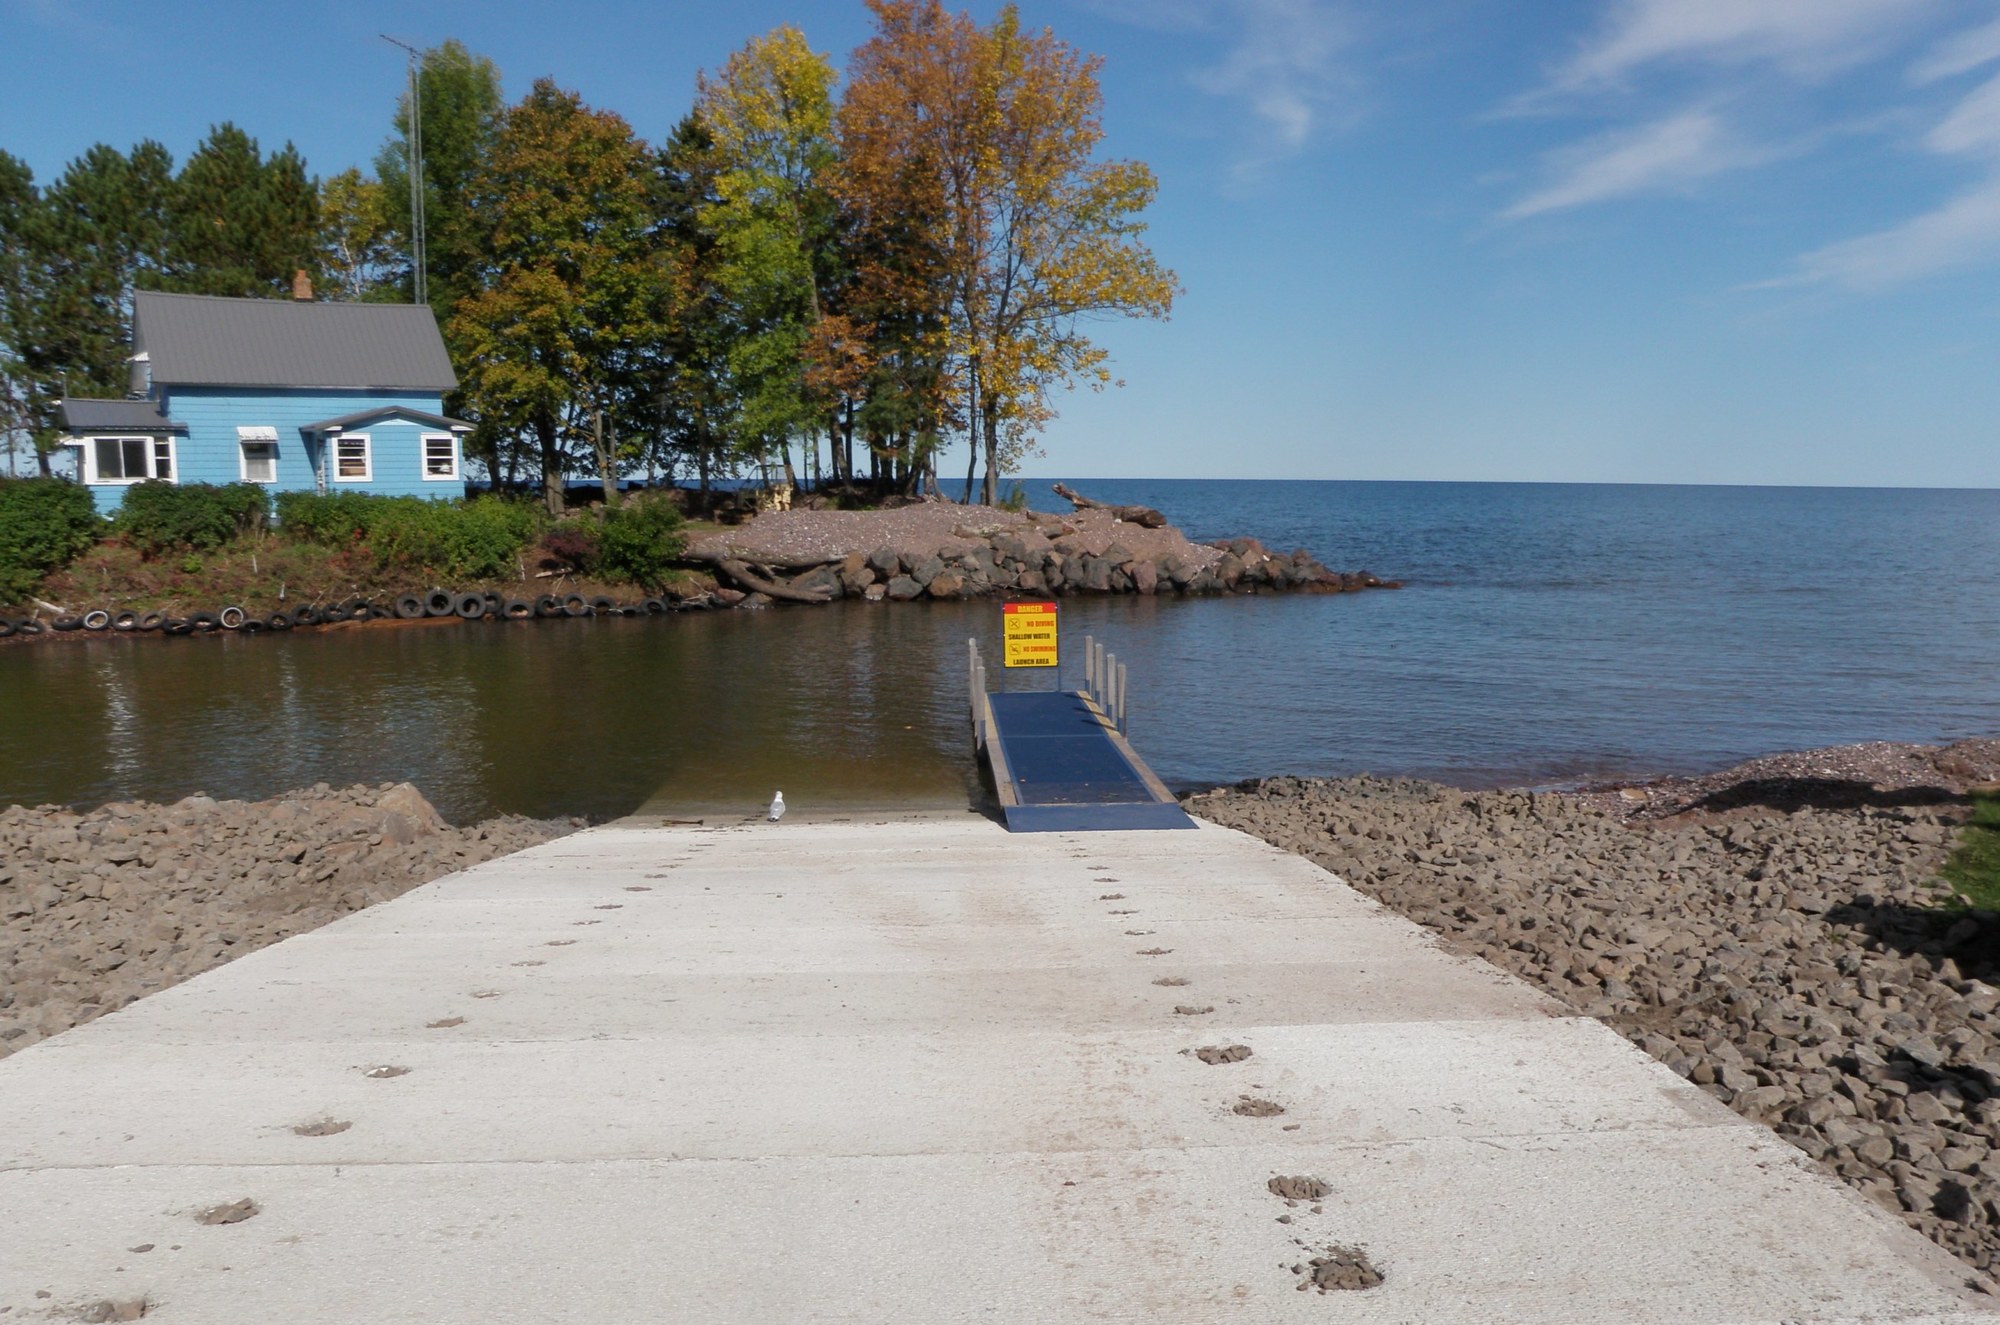 The Michigan Department of Natural Resources has completed work on the storm-damaged Oman Creek boating access site in Gogebic County.